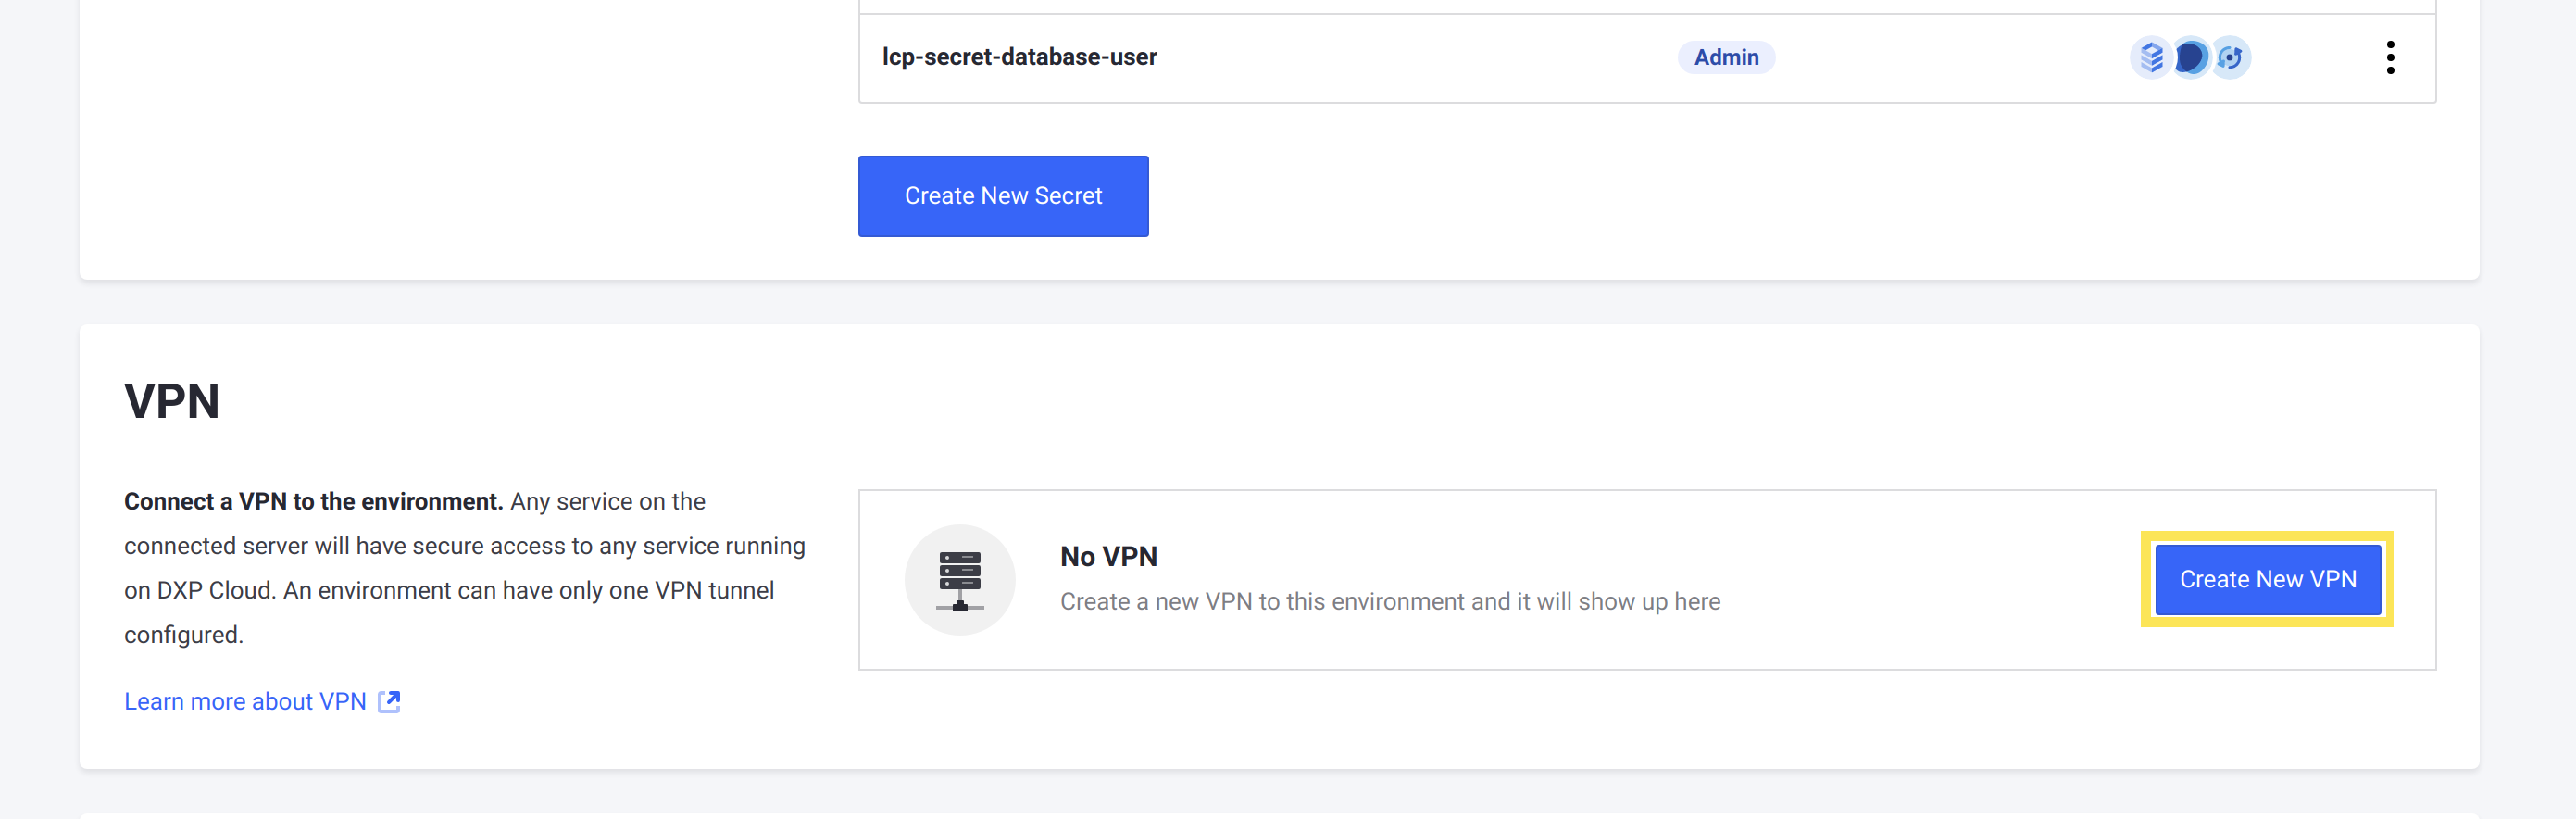 Click Create New VPN to begin configuring the VPN connection settings.